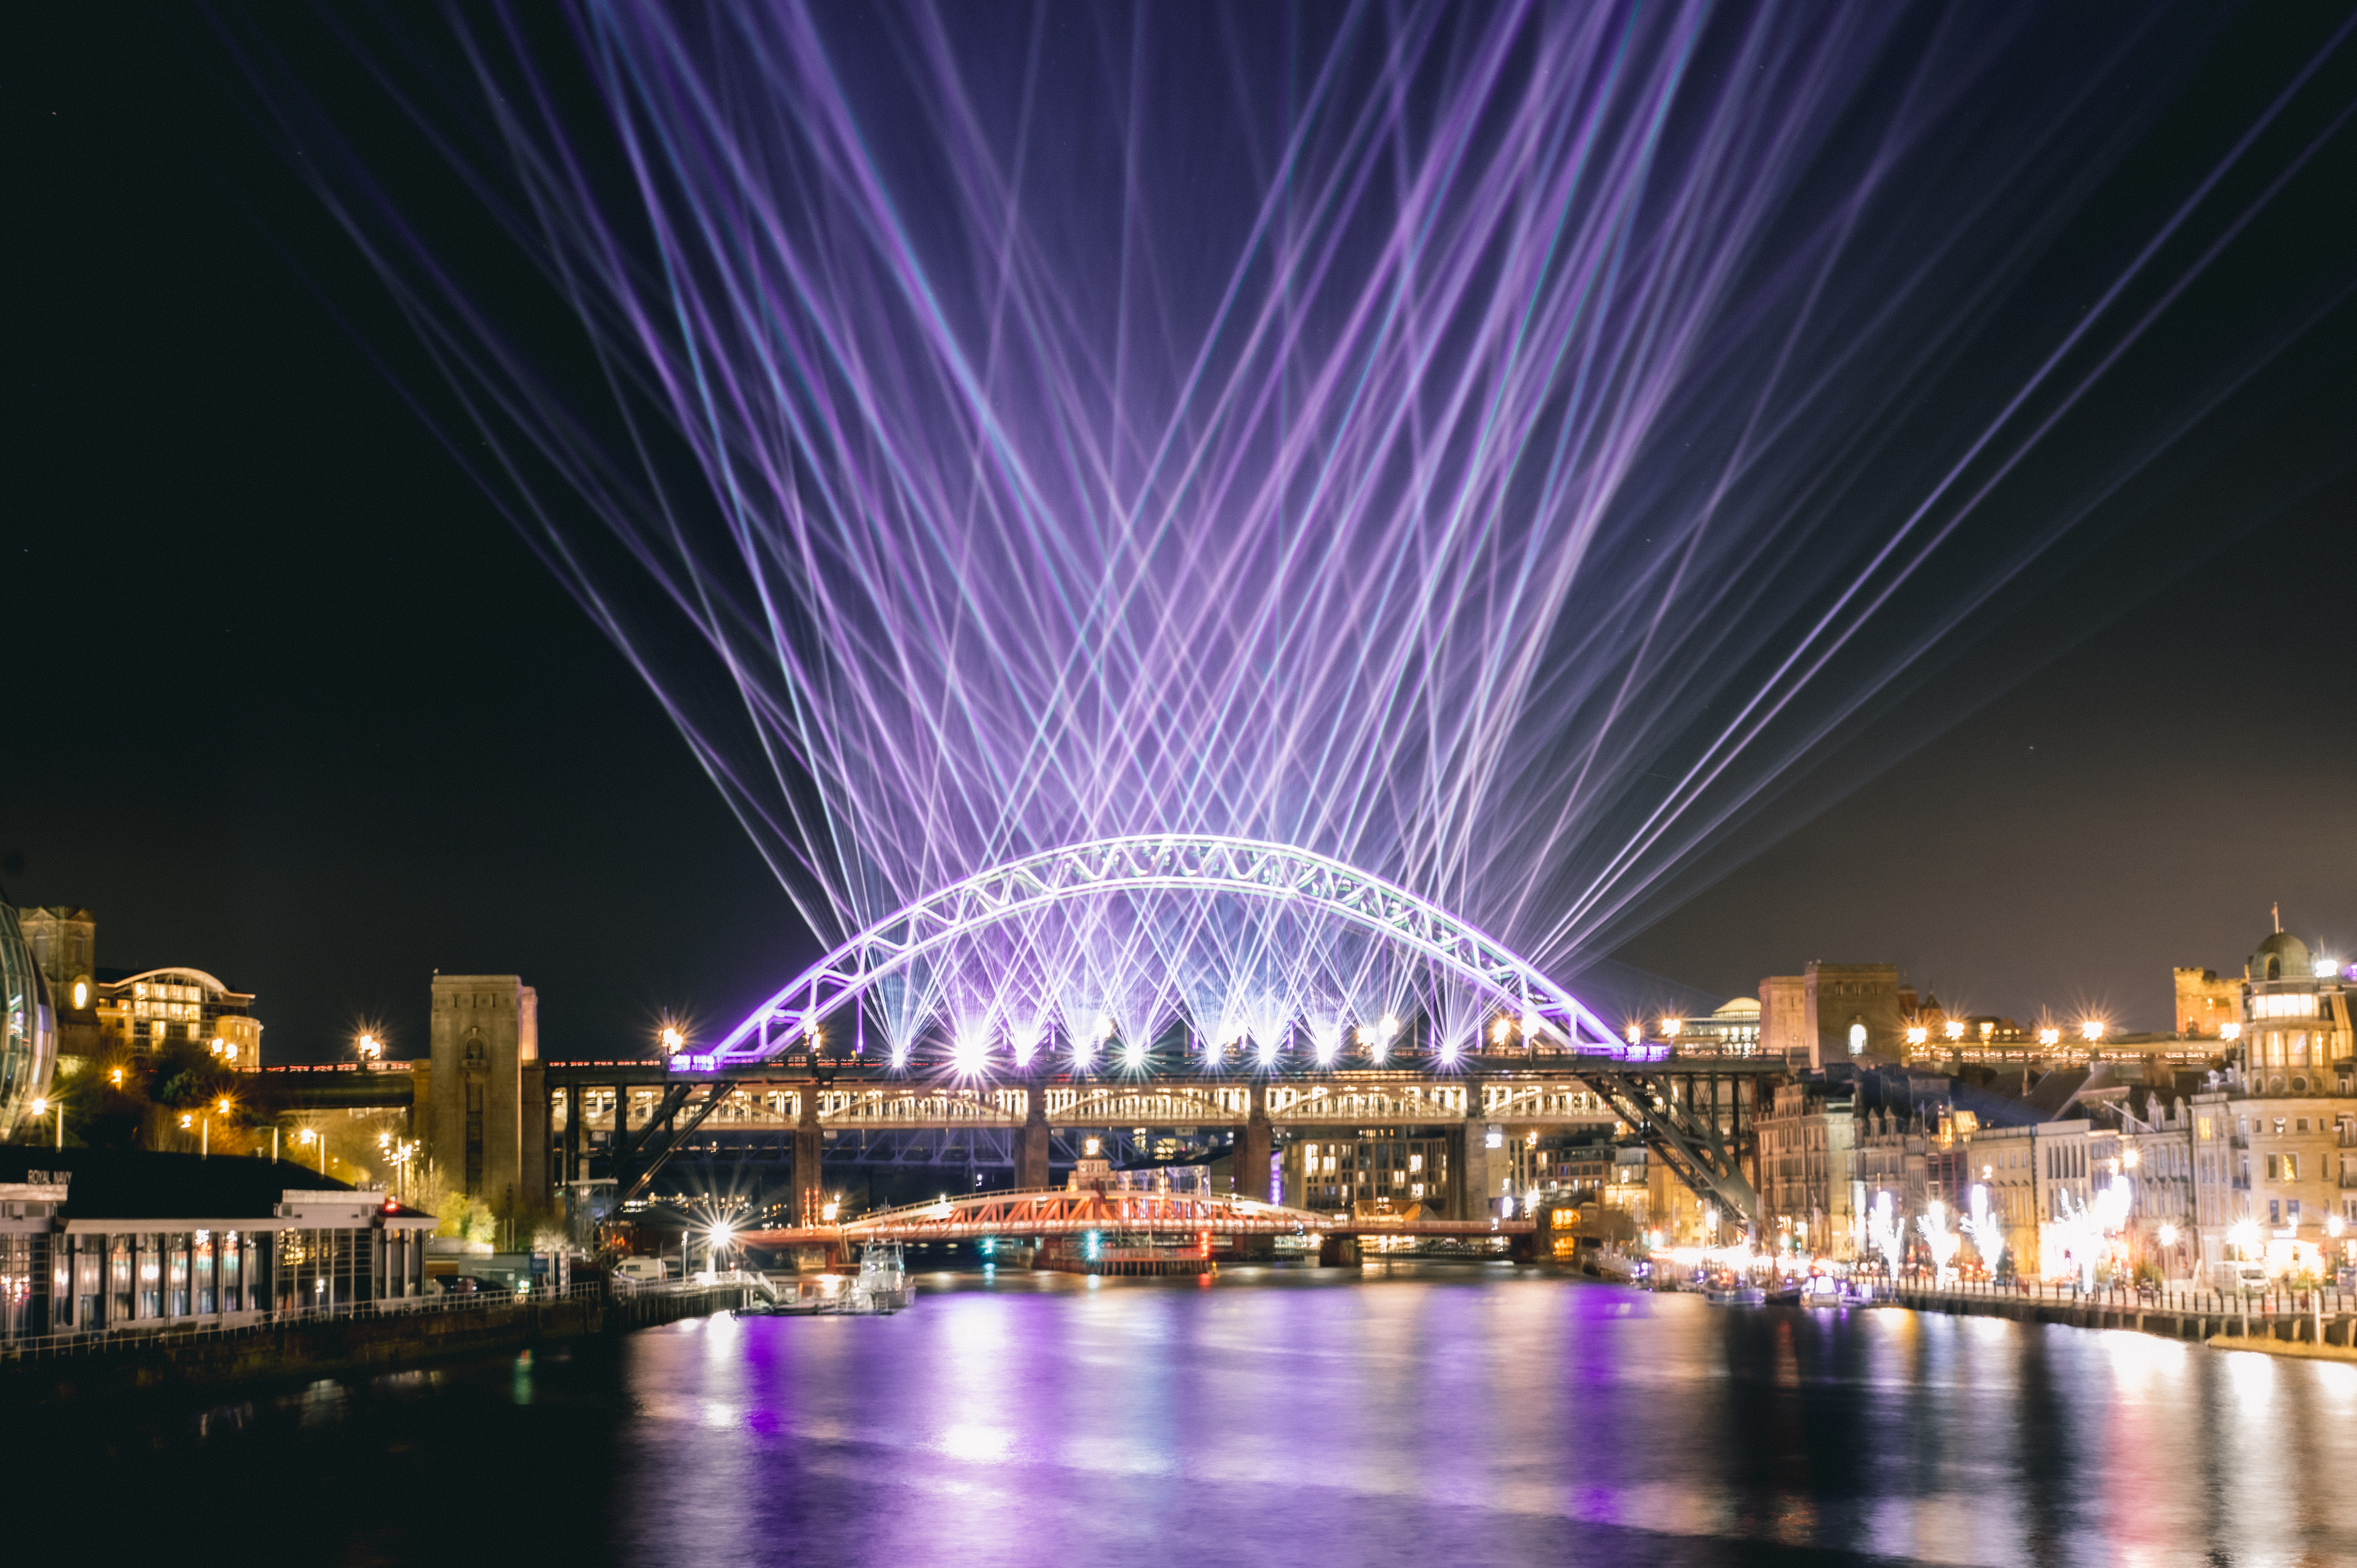 Image of River Tyne at nighttime with laser beams protruding from the Tyne Bridge.